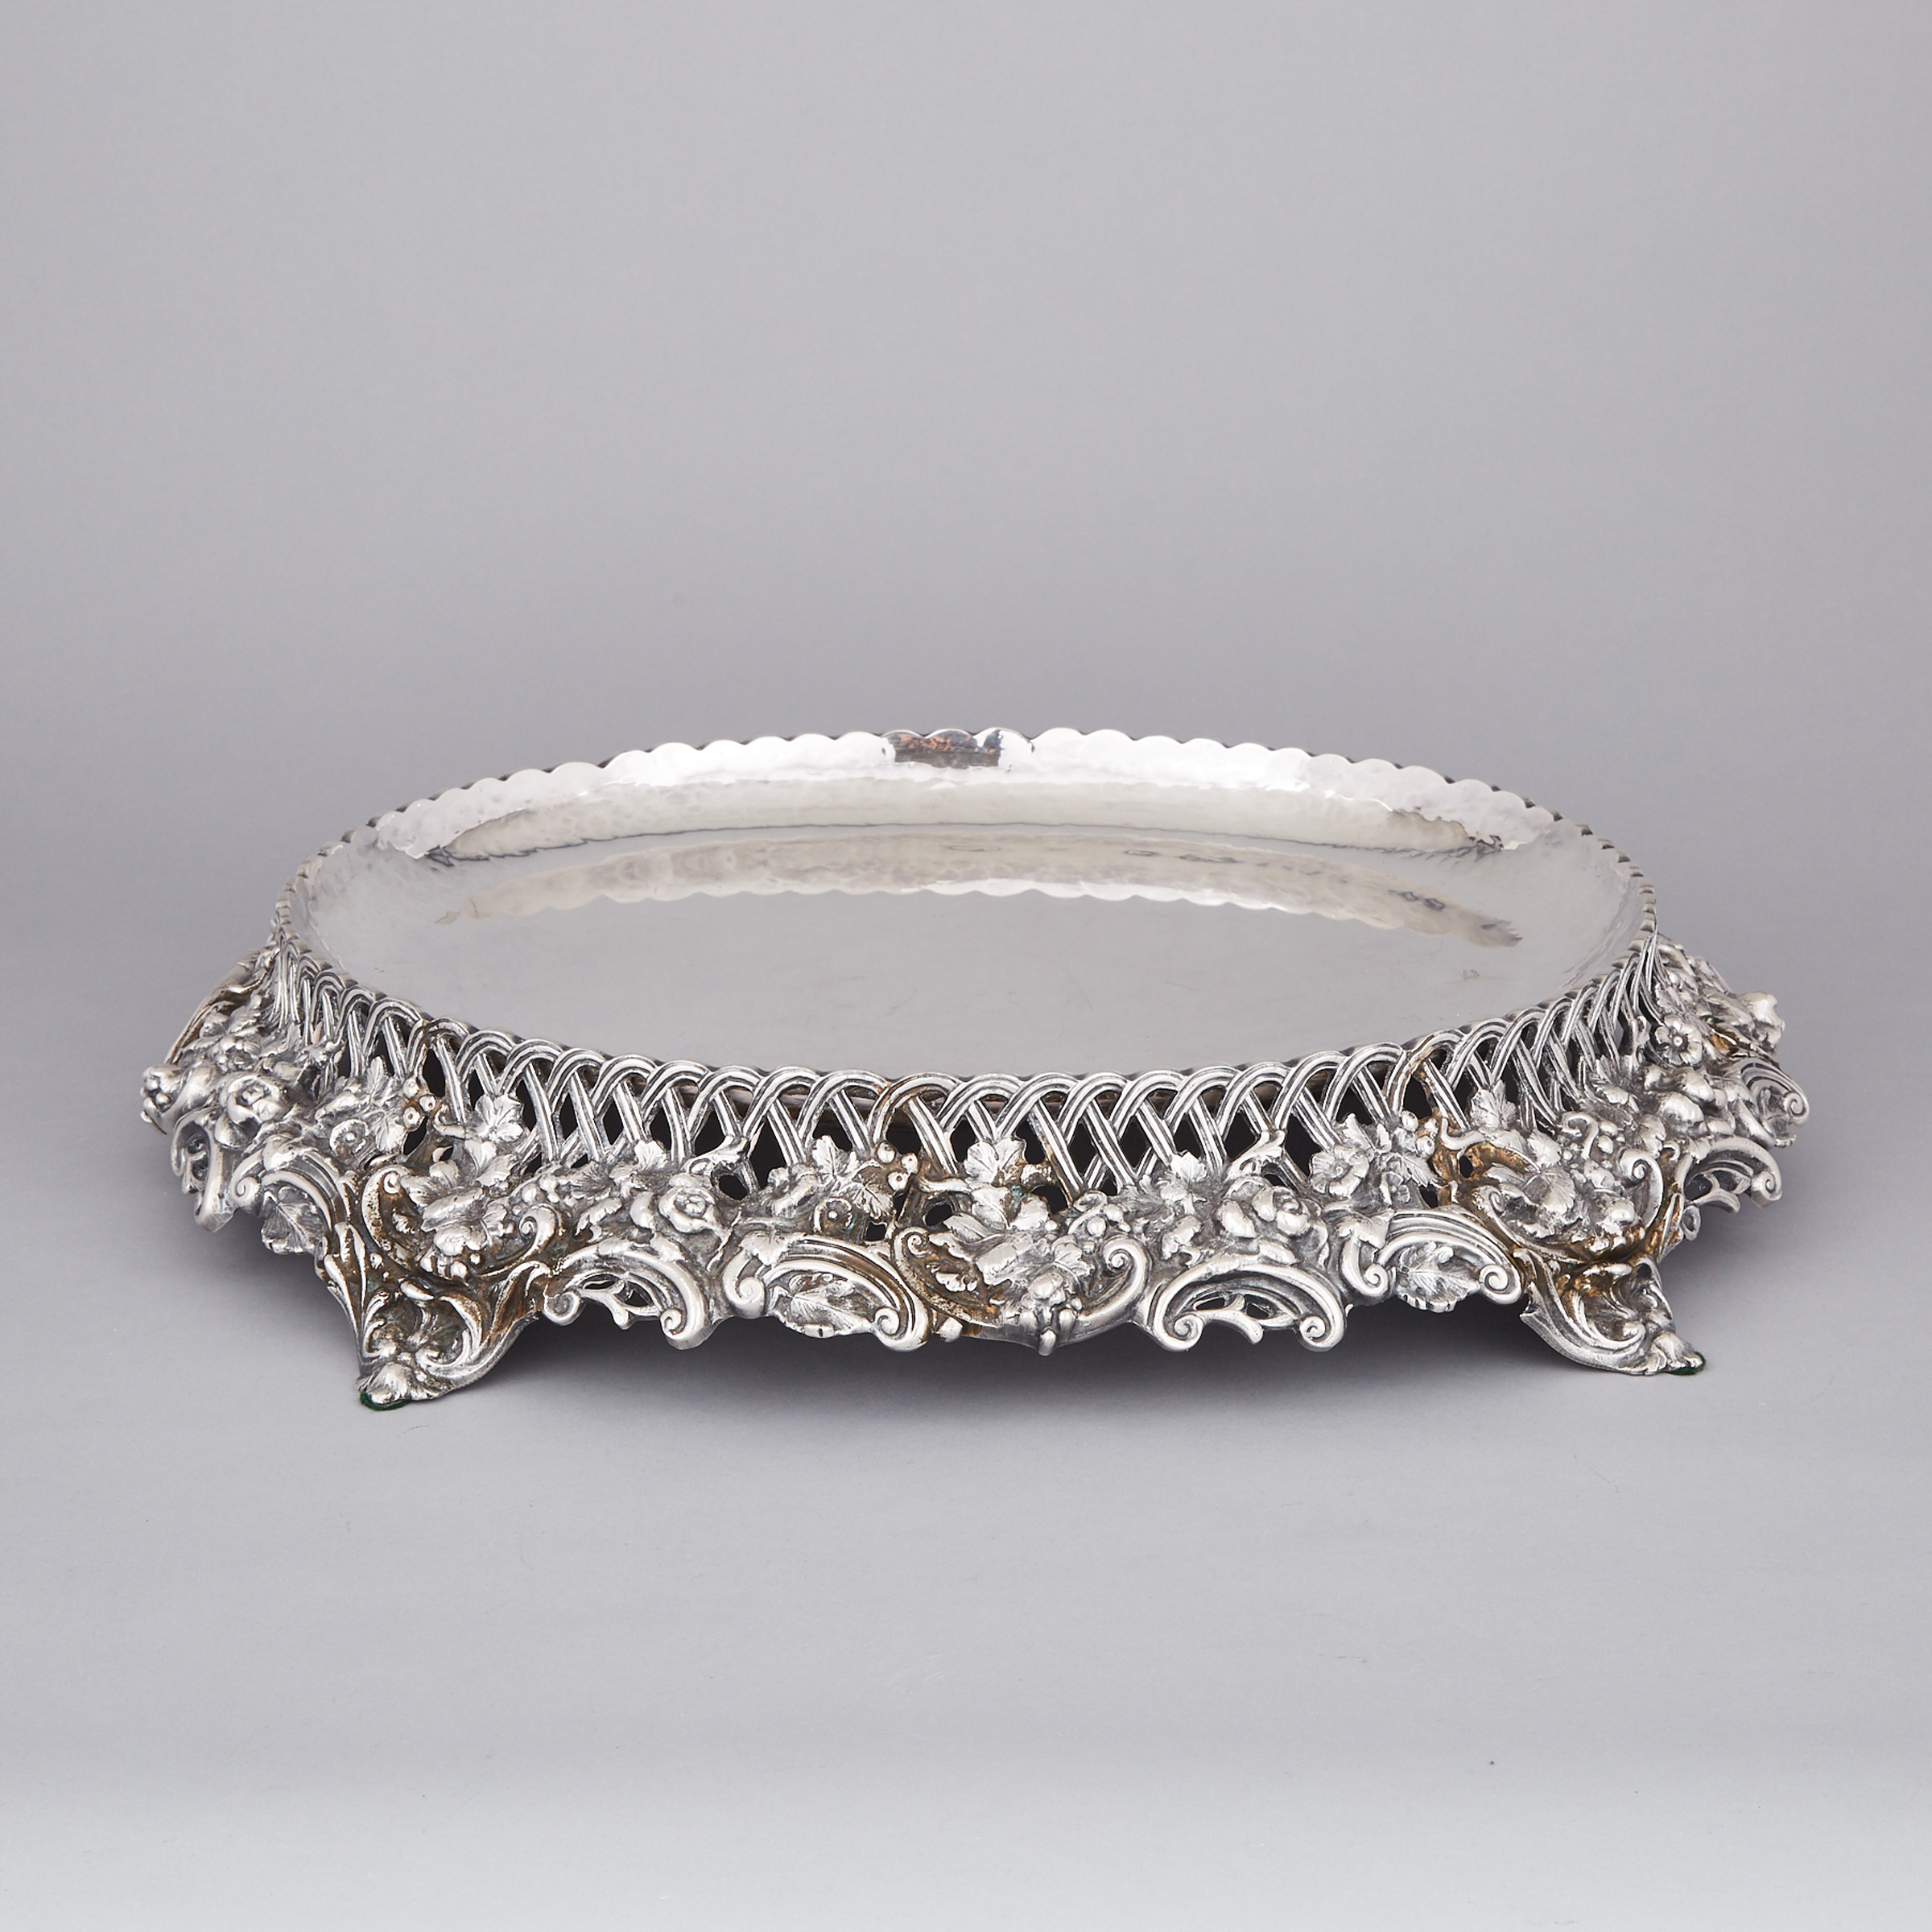 Silver Plated Oval Centrepiece, probably American, 20th century